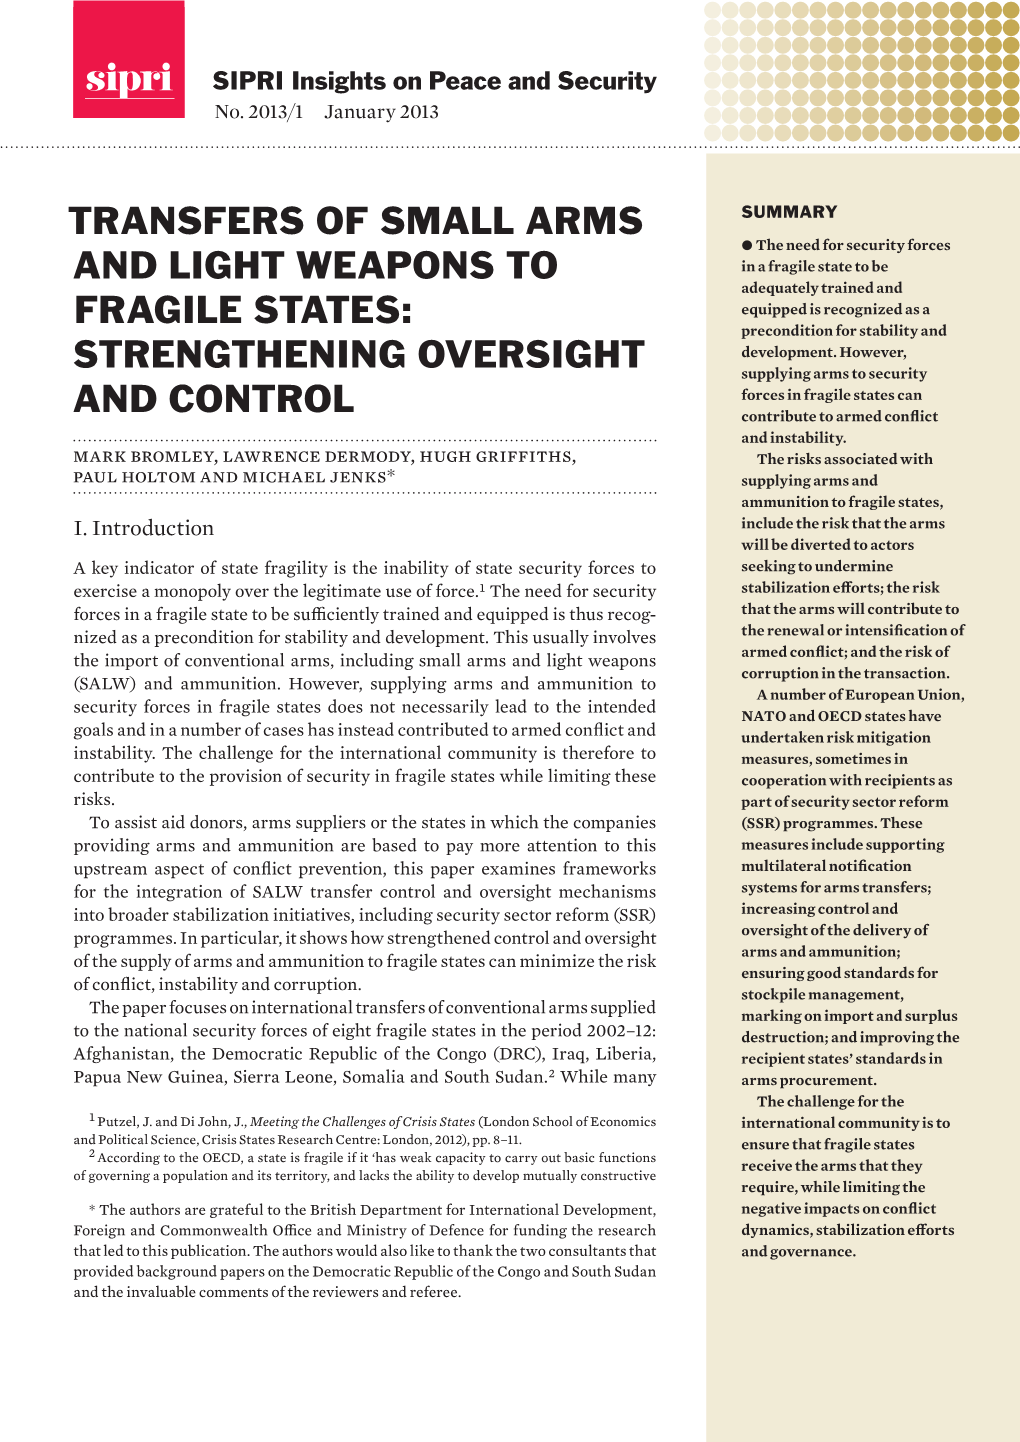 Transfers of Small Arms and Light Weapons to Fragile States